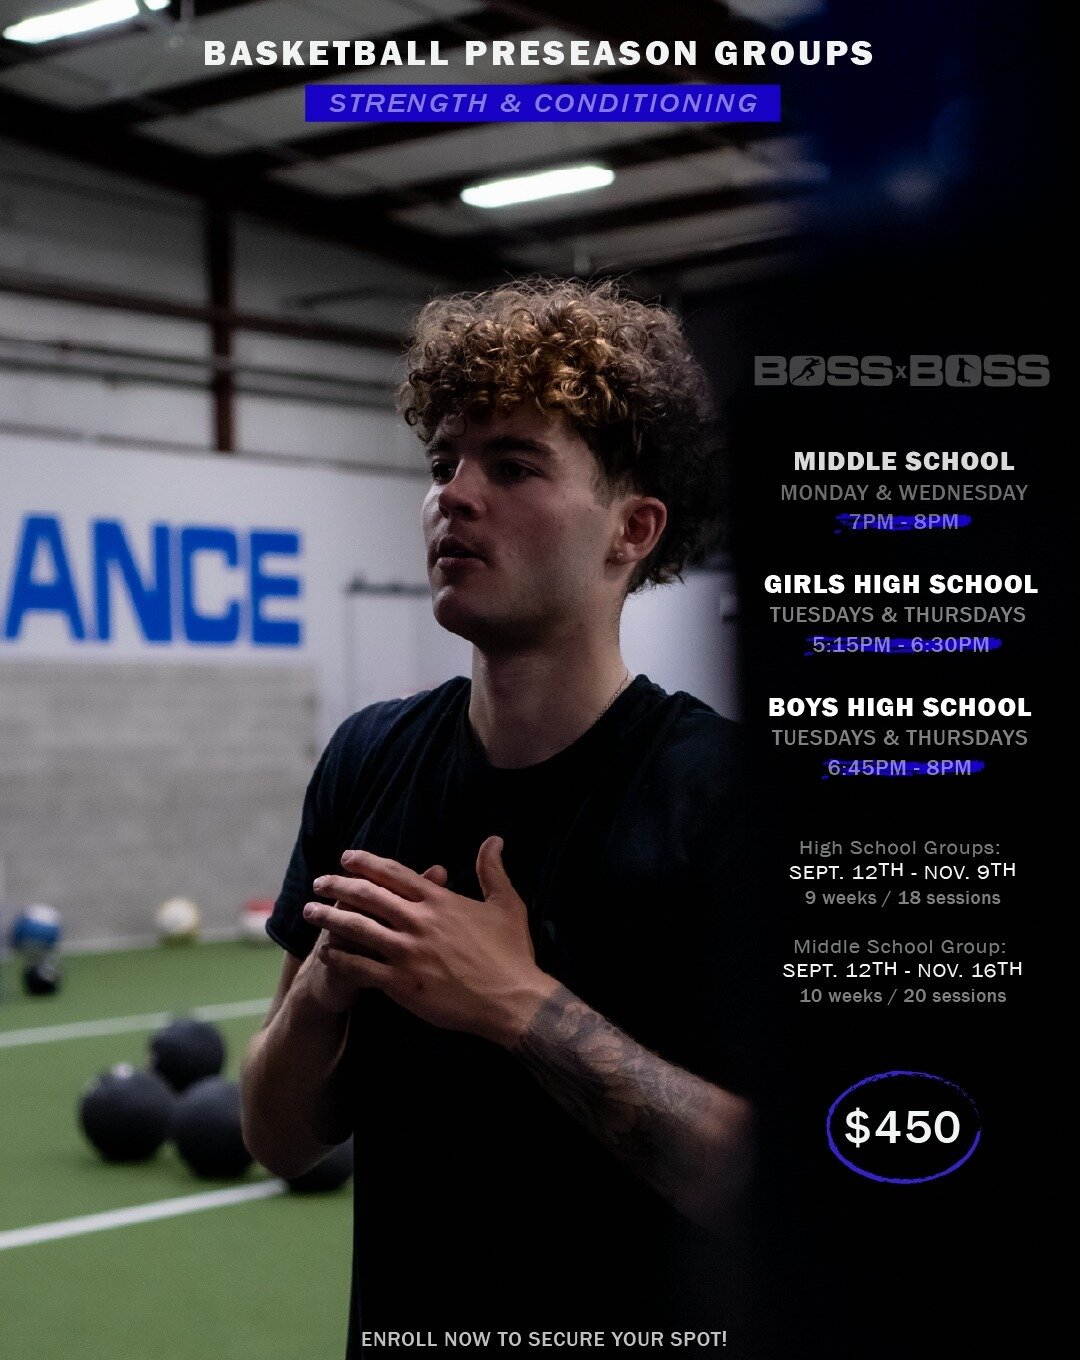 UPDATE:

Our previous post about the upcoming Boss Sports Performance - Basketball Preseason Program had the incorrect dates for the girls and boys high school groups.  These are the correct dates:

The Middle School Group will take place Mondays &am